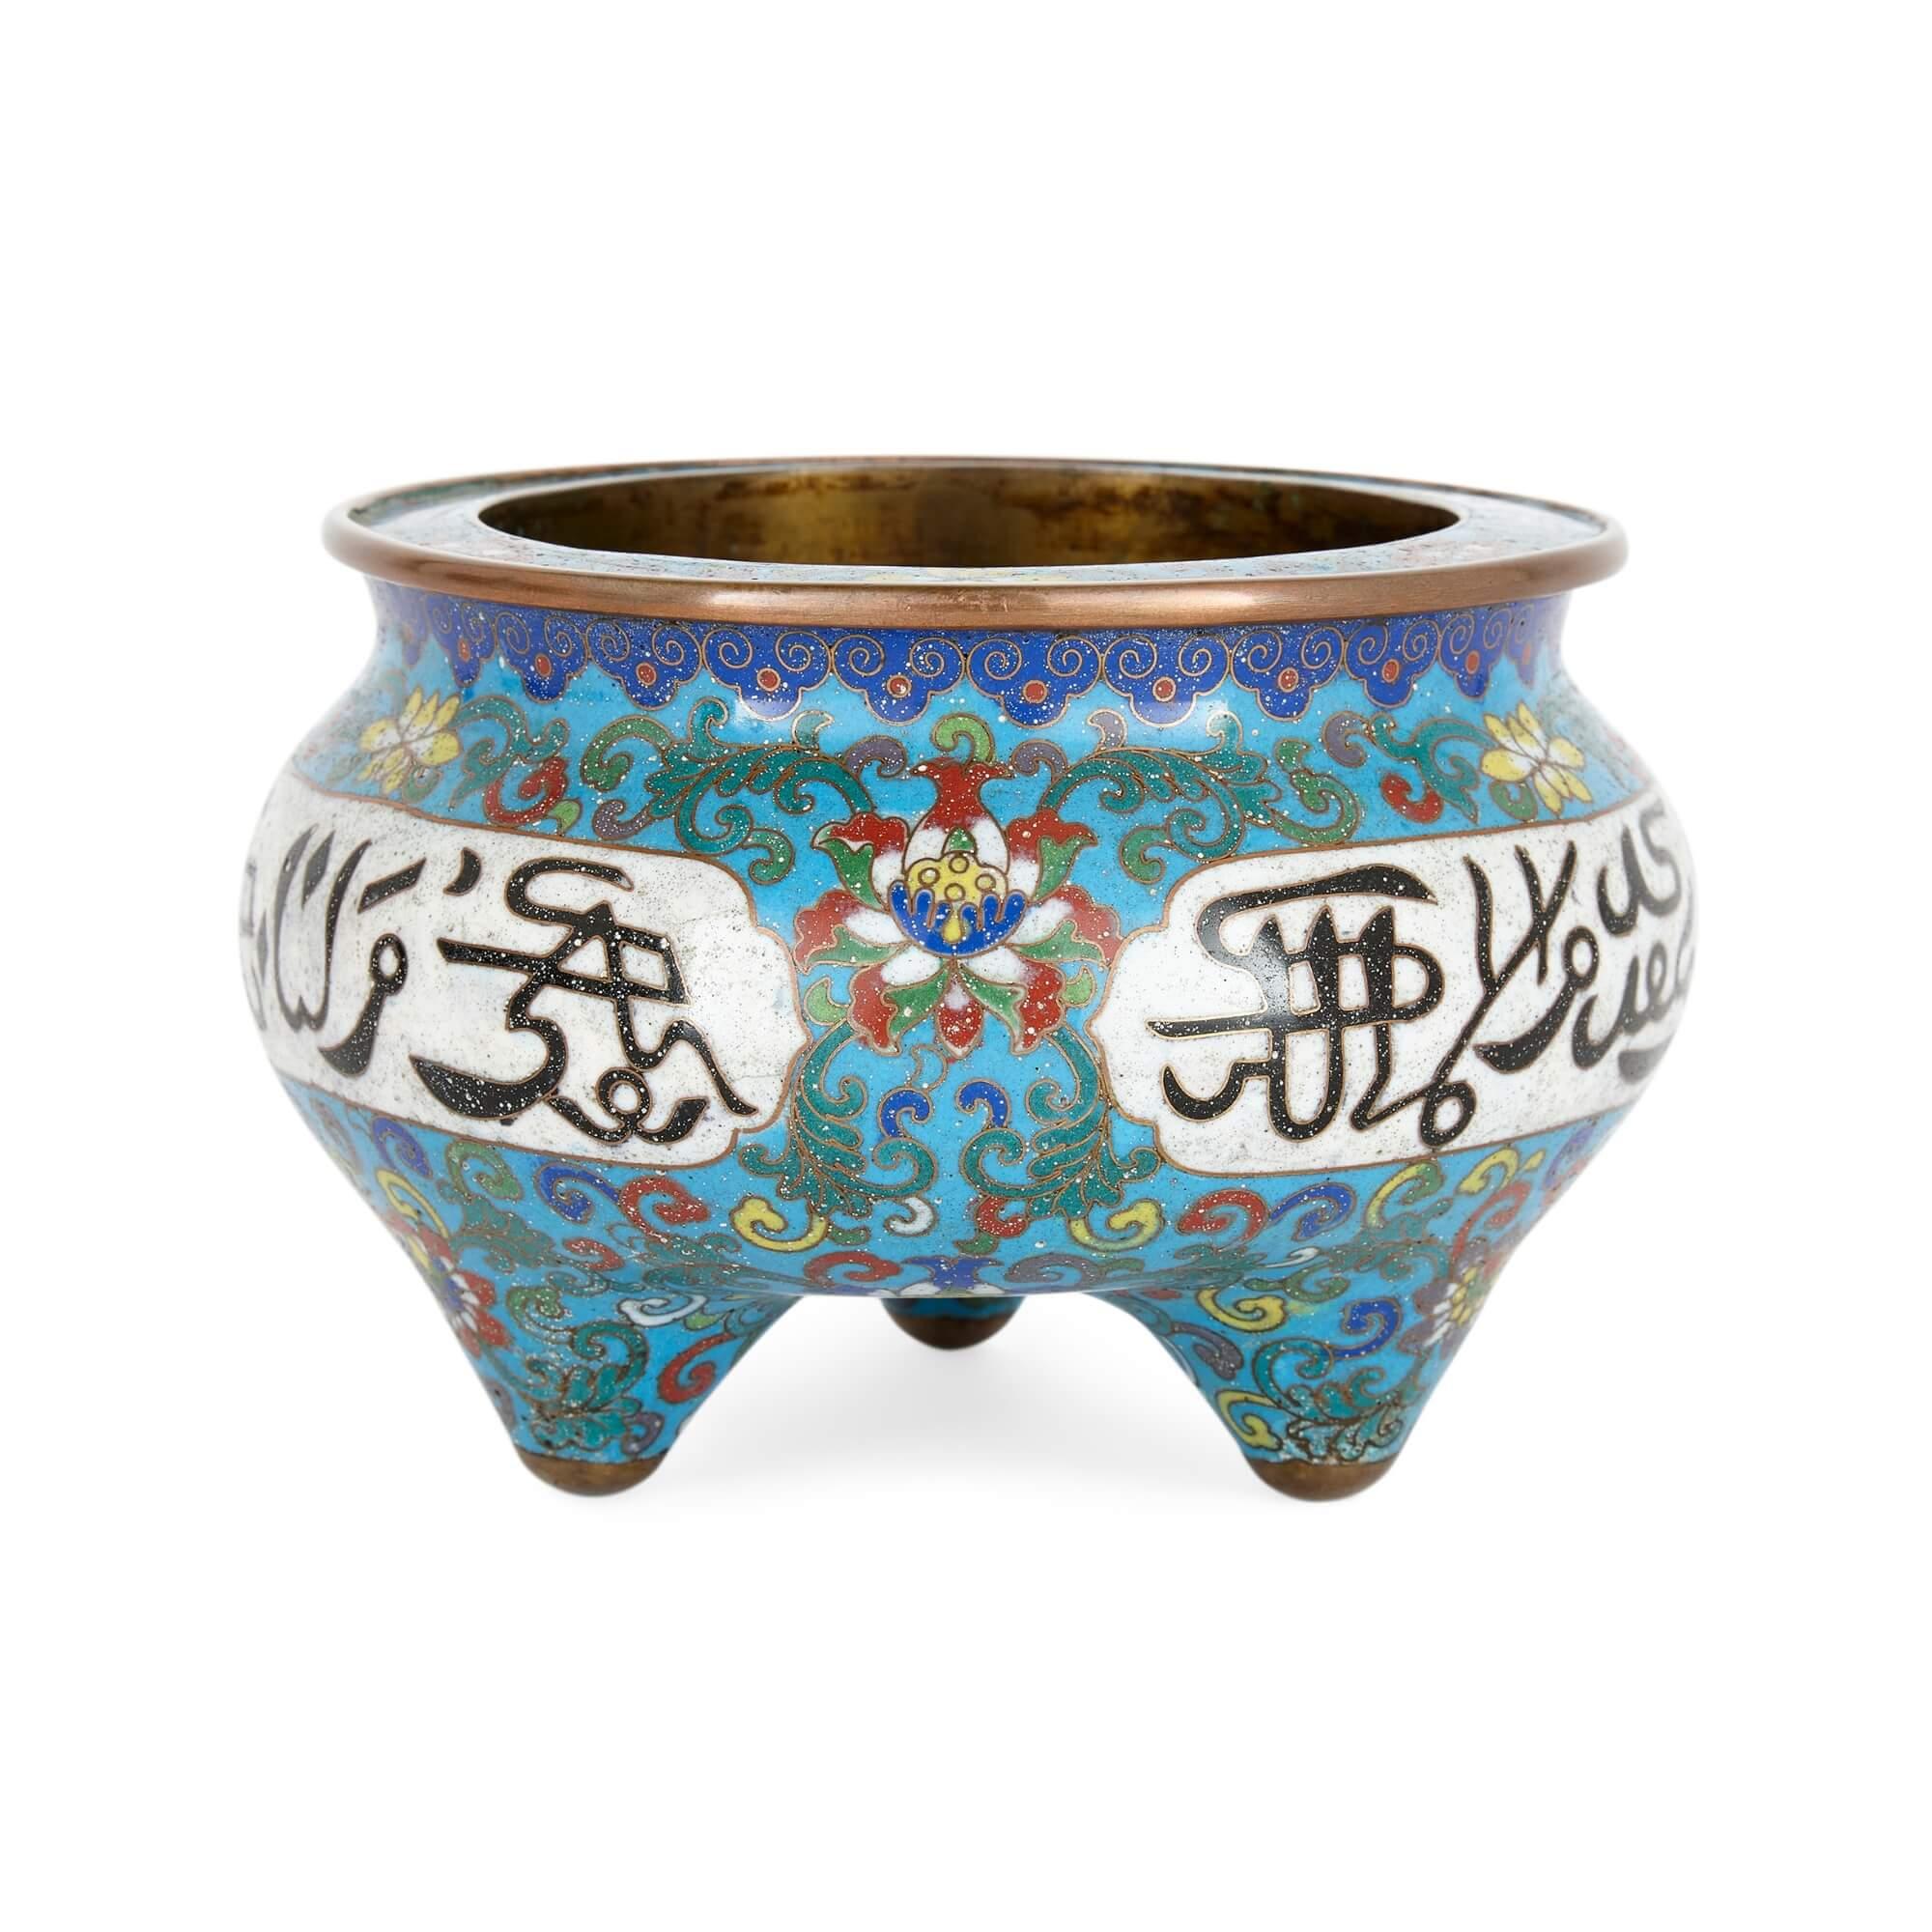 Qing Dynasty Cloisonné Enamel Chinese Vase with Arabic Inscriptions In Good Condition For Sale In London, GB